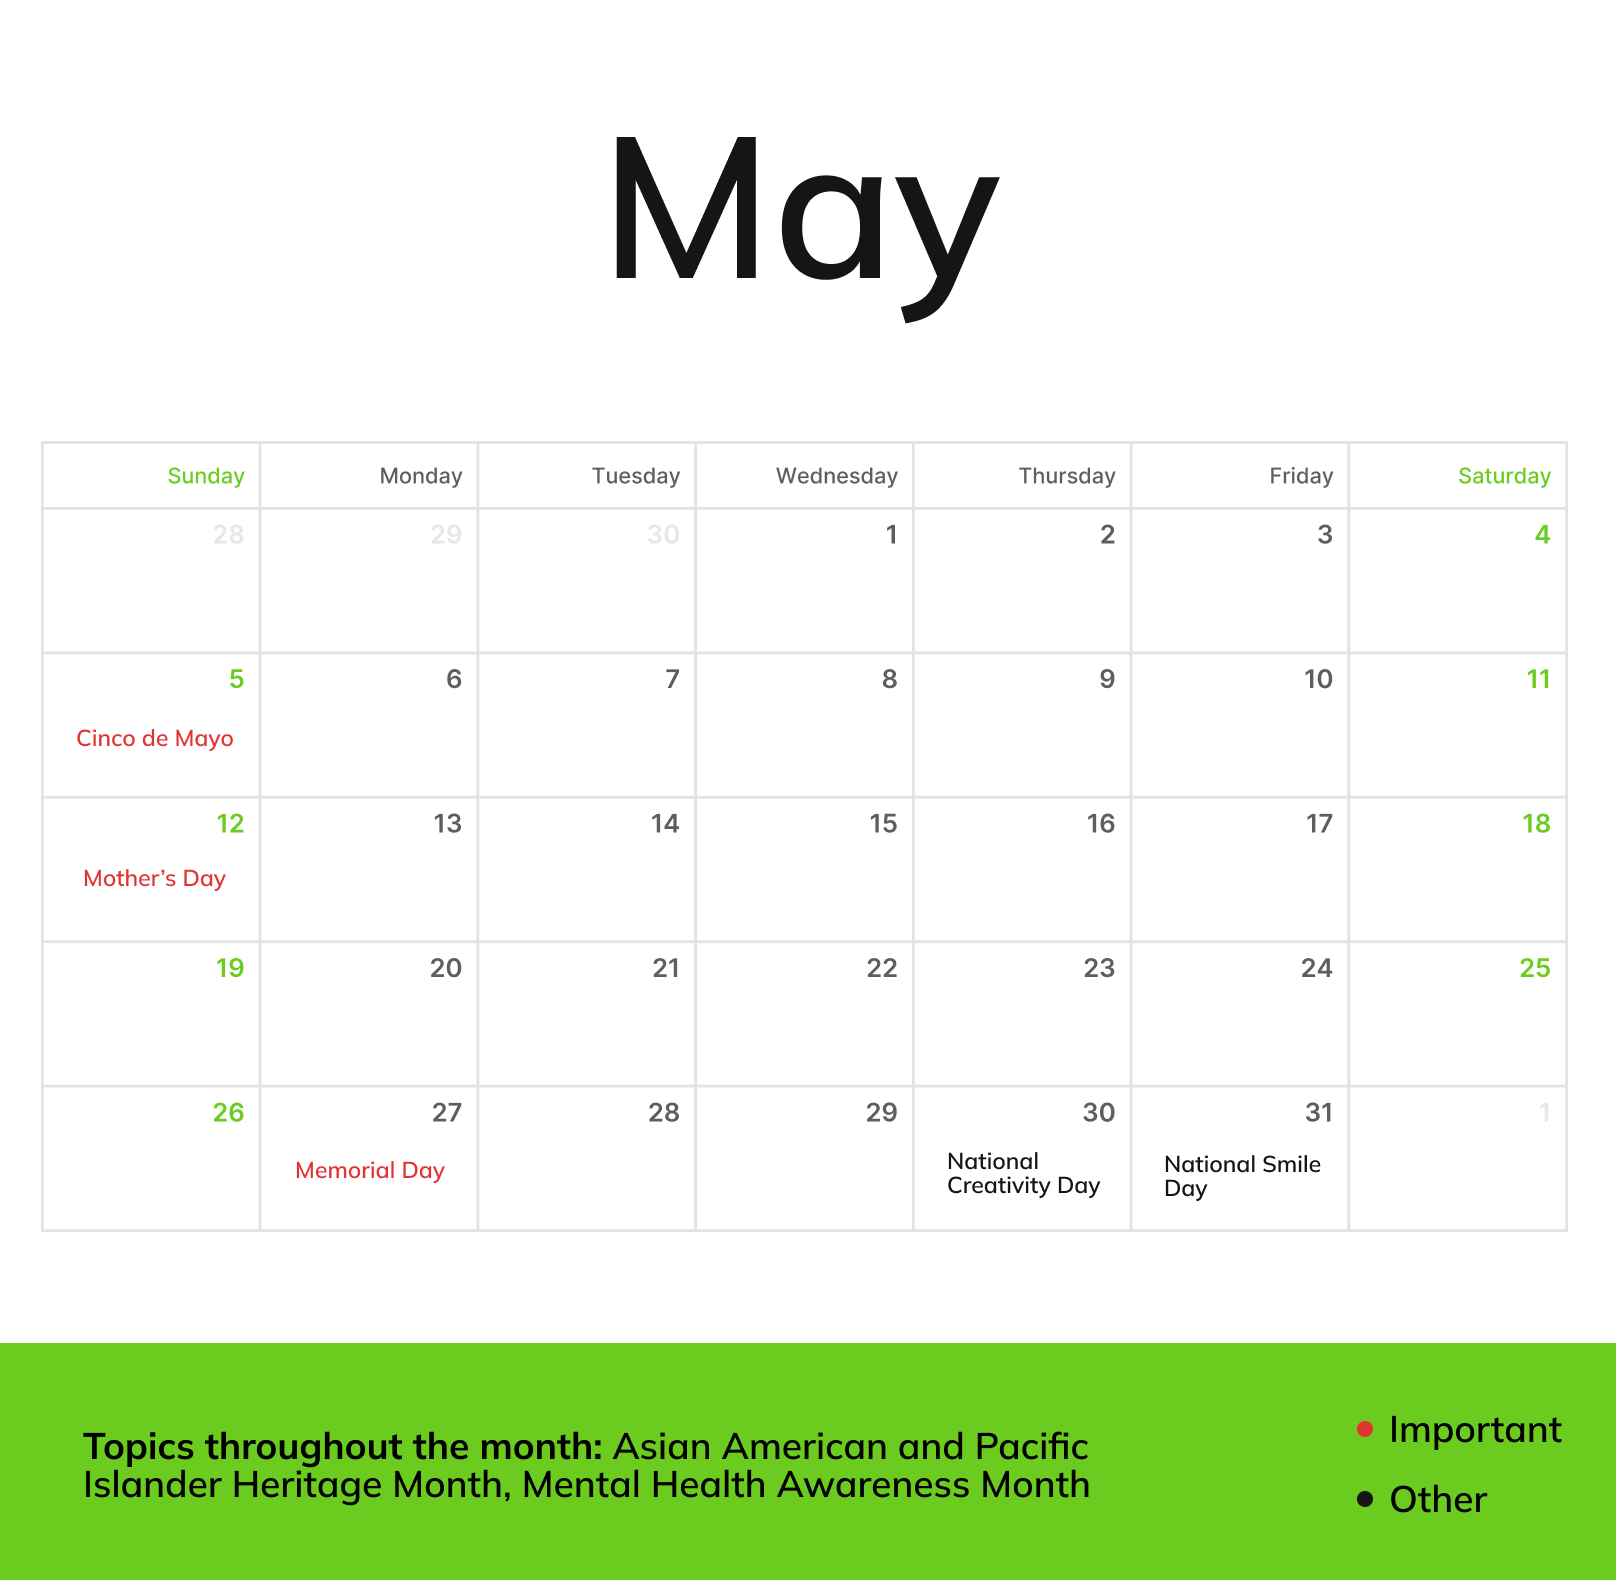 A May monthly calendar with holidays and topics throughout the month being Asian American and Pacific Islander Heritage Month, Mental Health Awareness Month